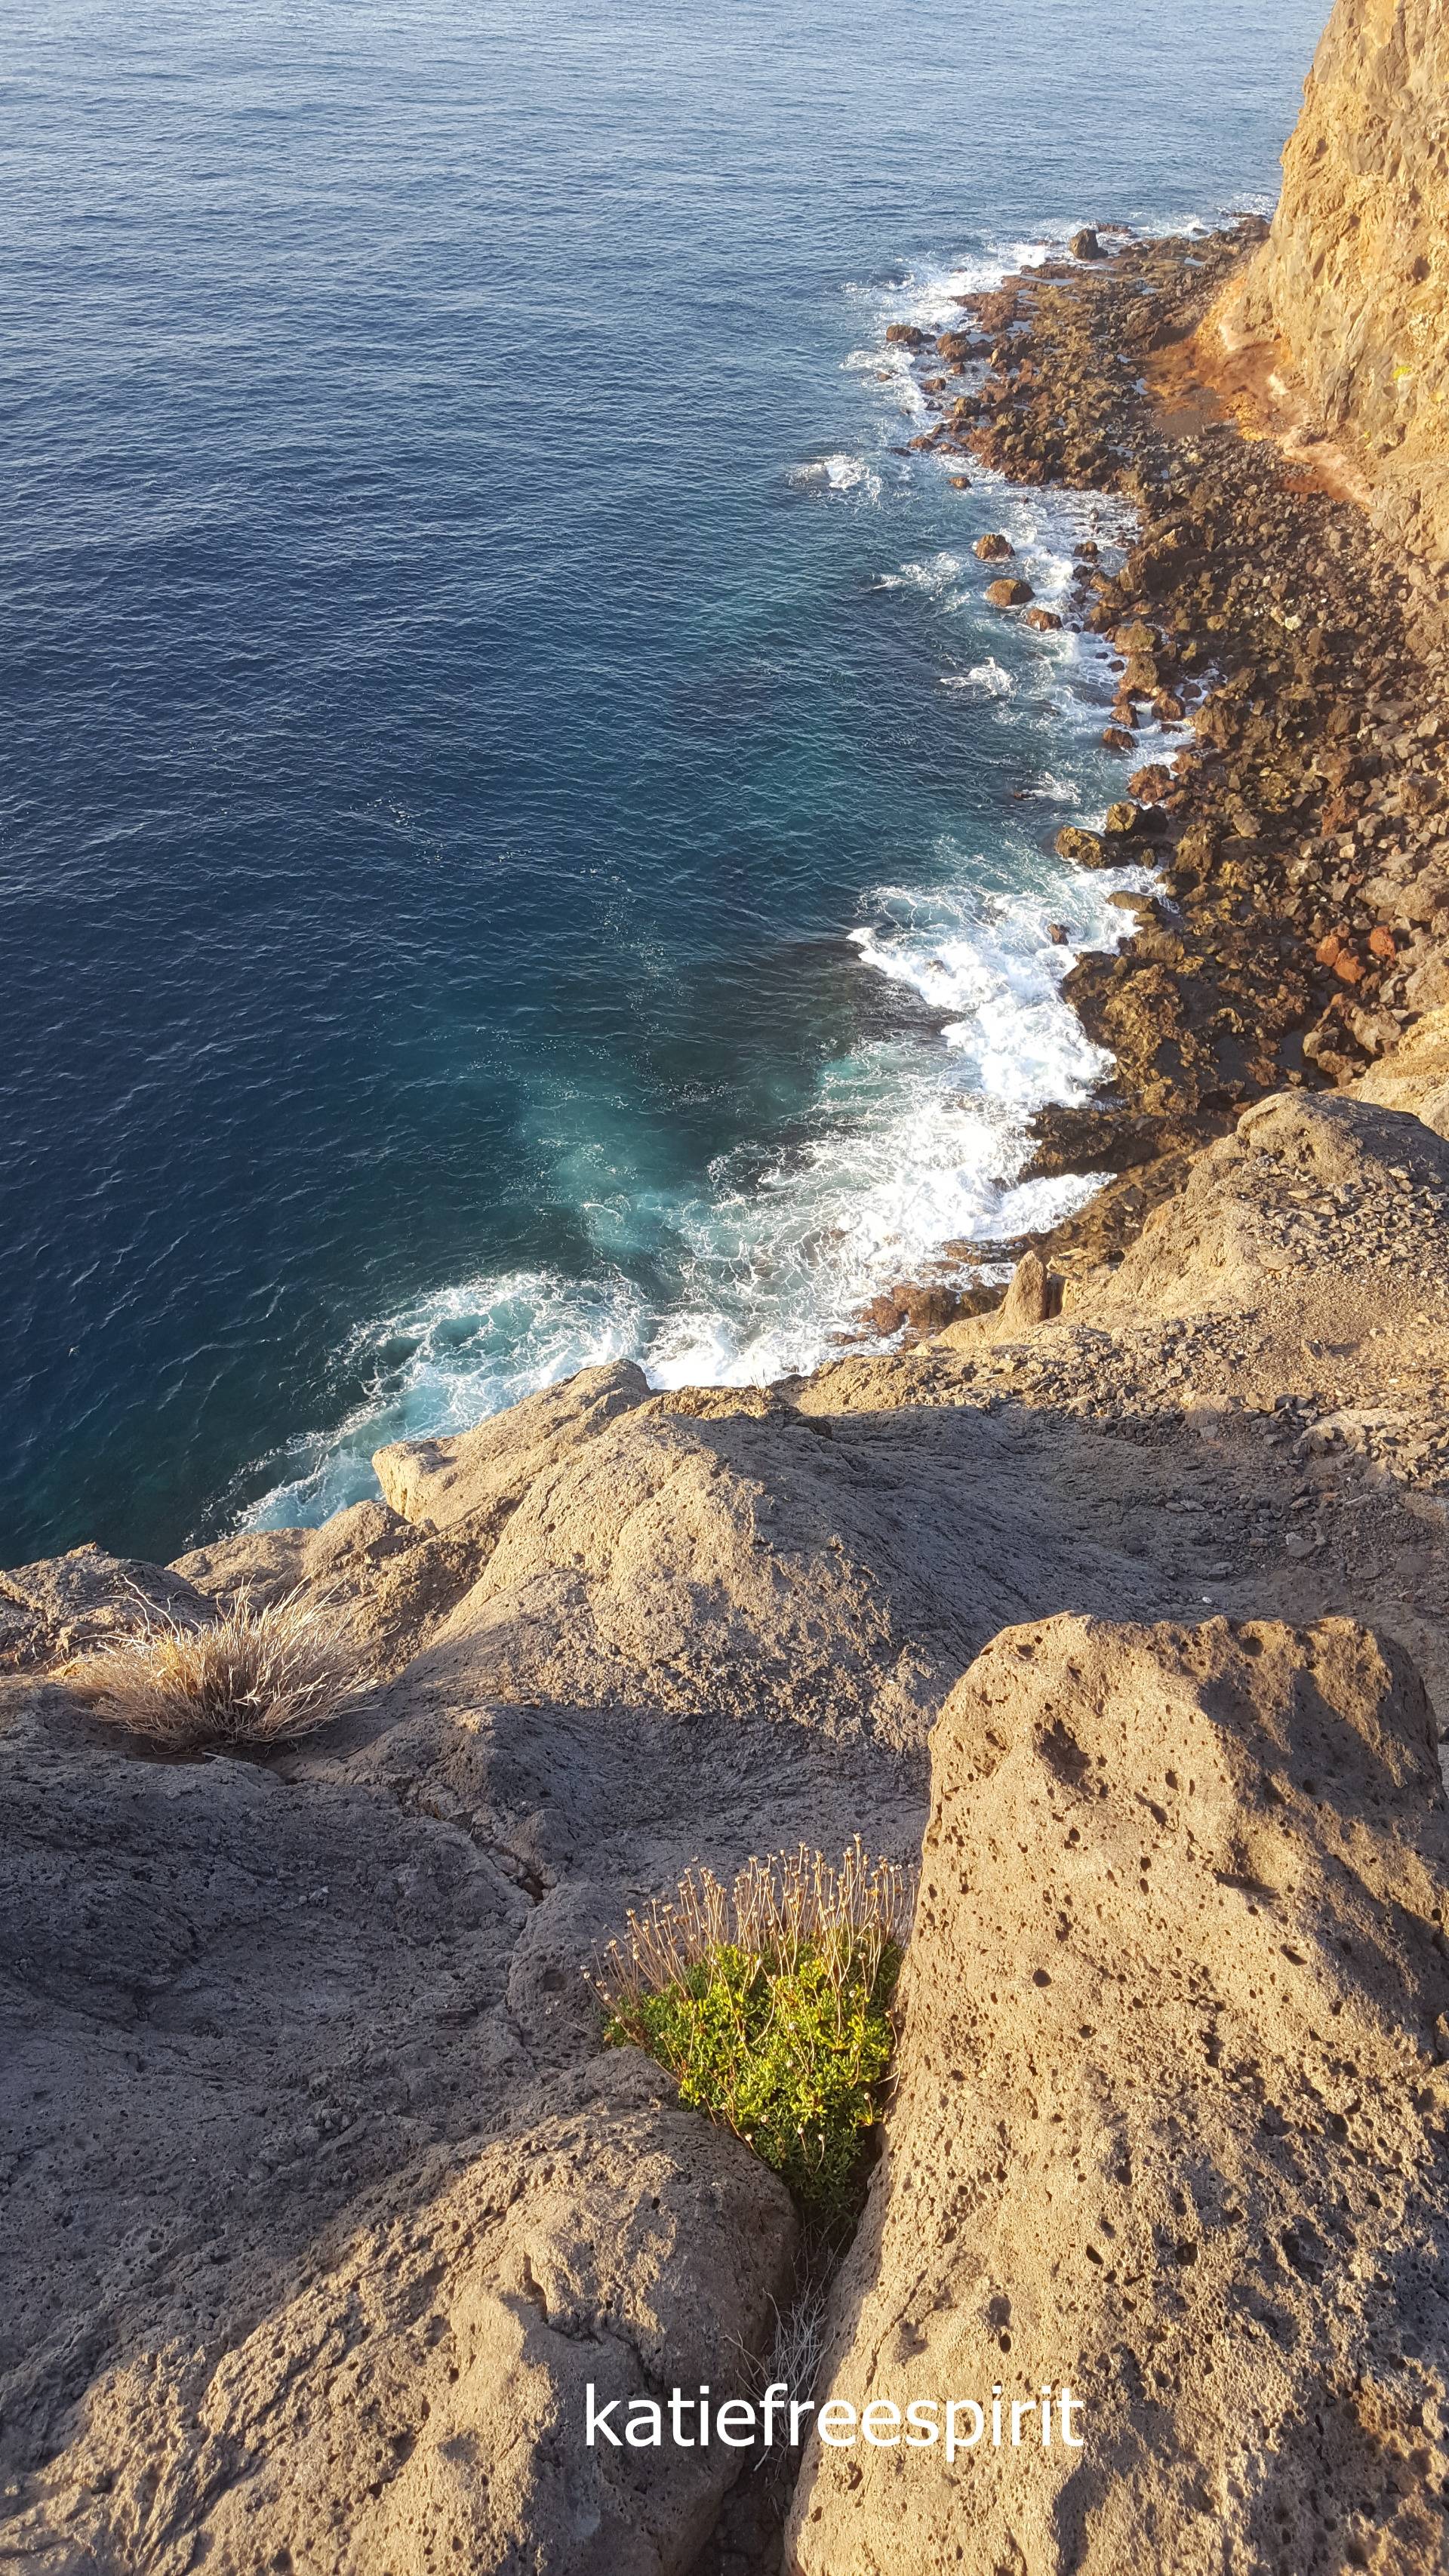 See how beautiful the sunrise is on the cliffs of Gomera, with a view of the Teide volcano